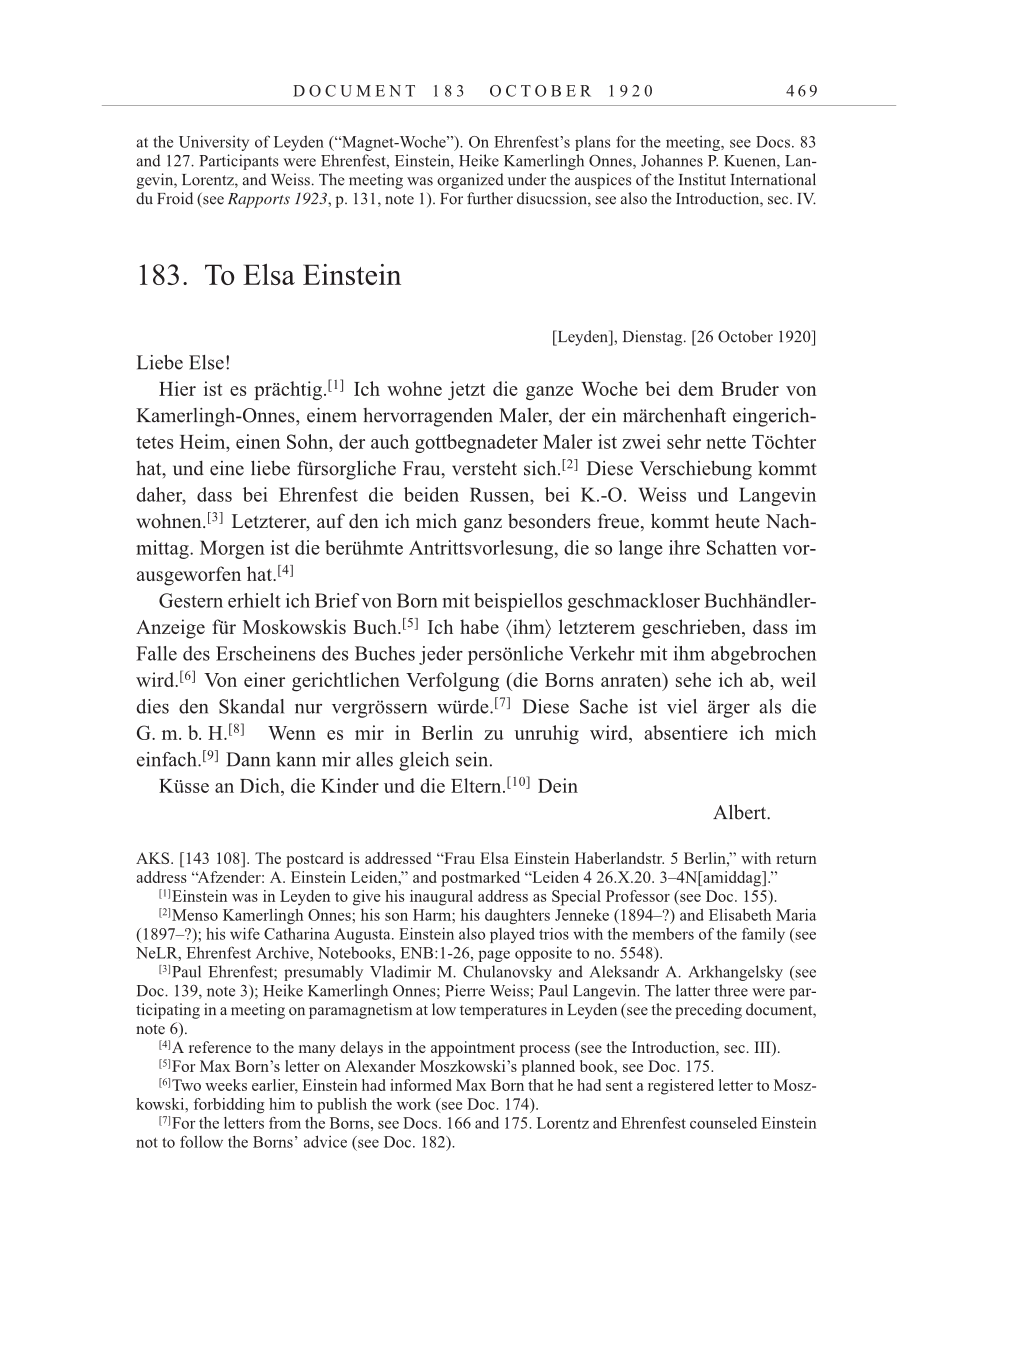 Volume 10: The Berlin Years: Correspondence May-December 1920 / Supplementary Correspondence 1909-1920 page 469